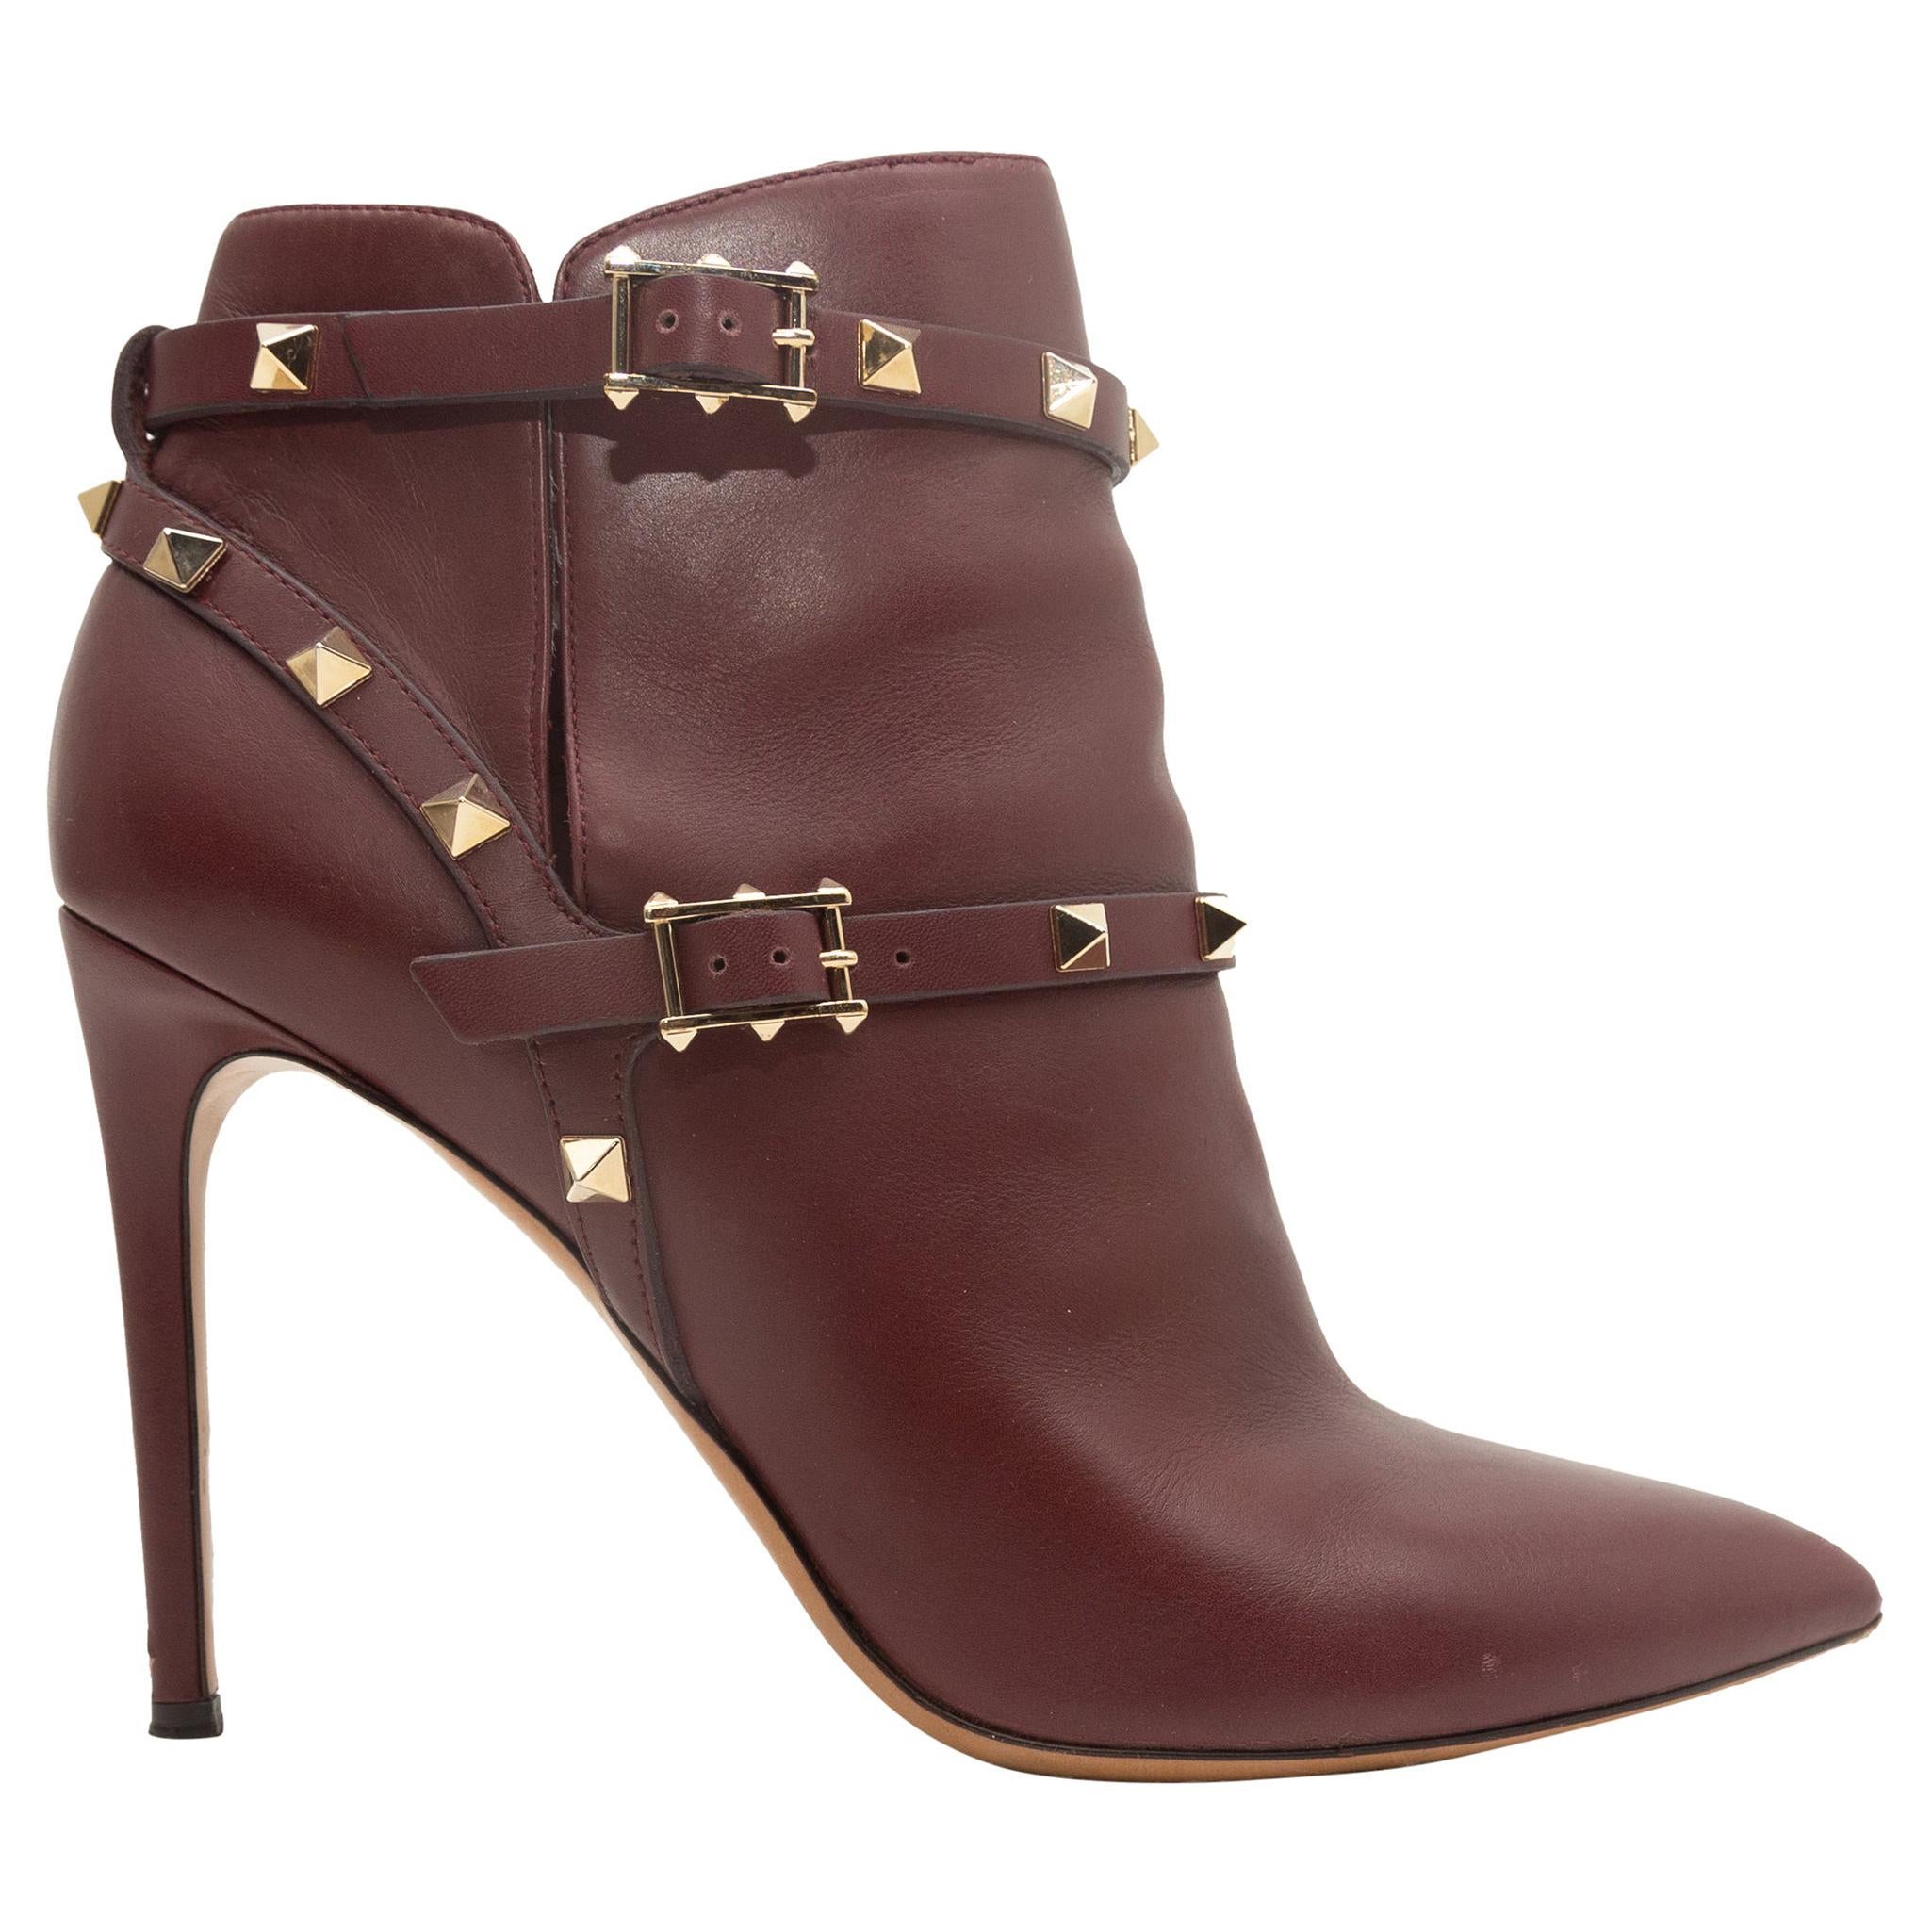 Valentino Burgundy Pointed-Toe Leather Rockstud Booties